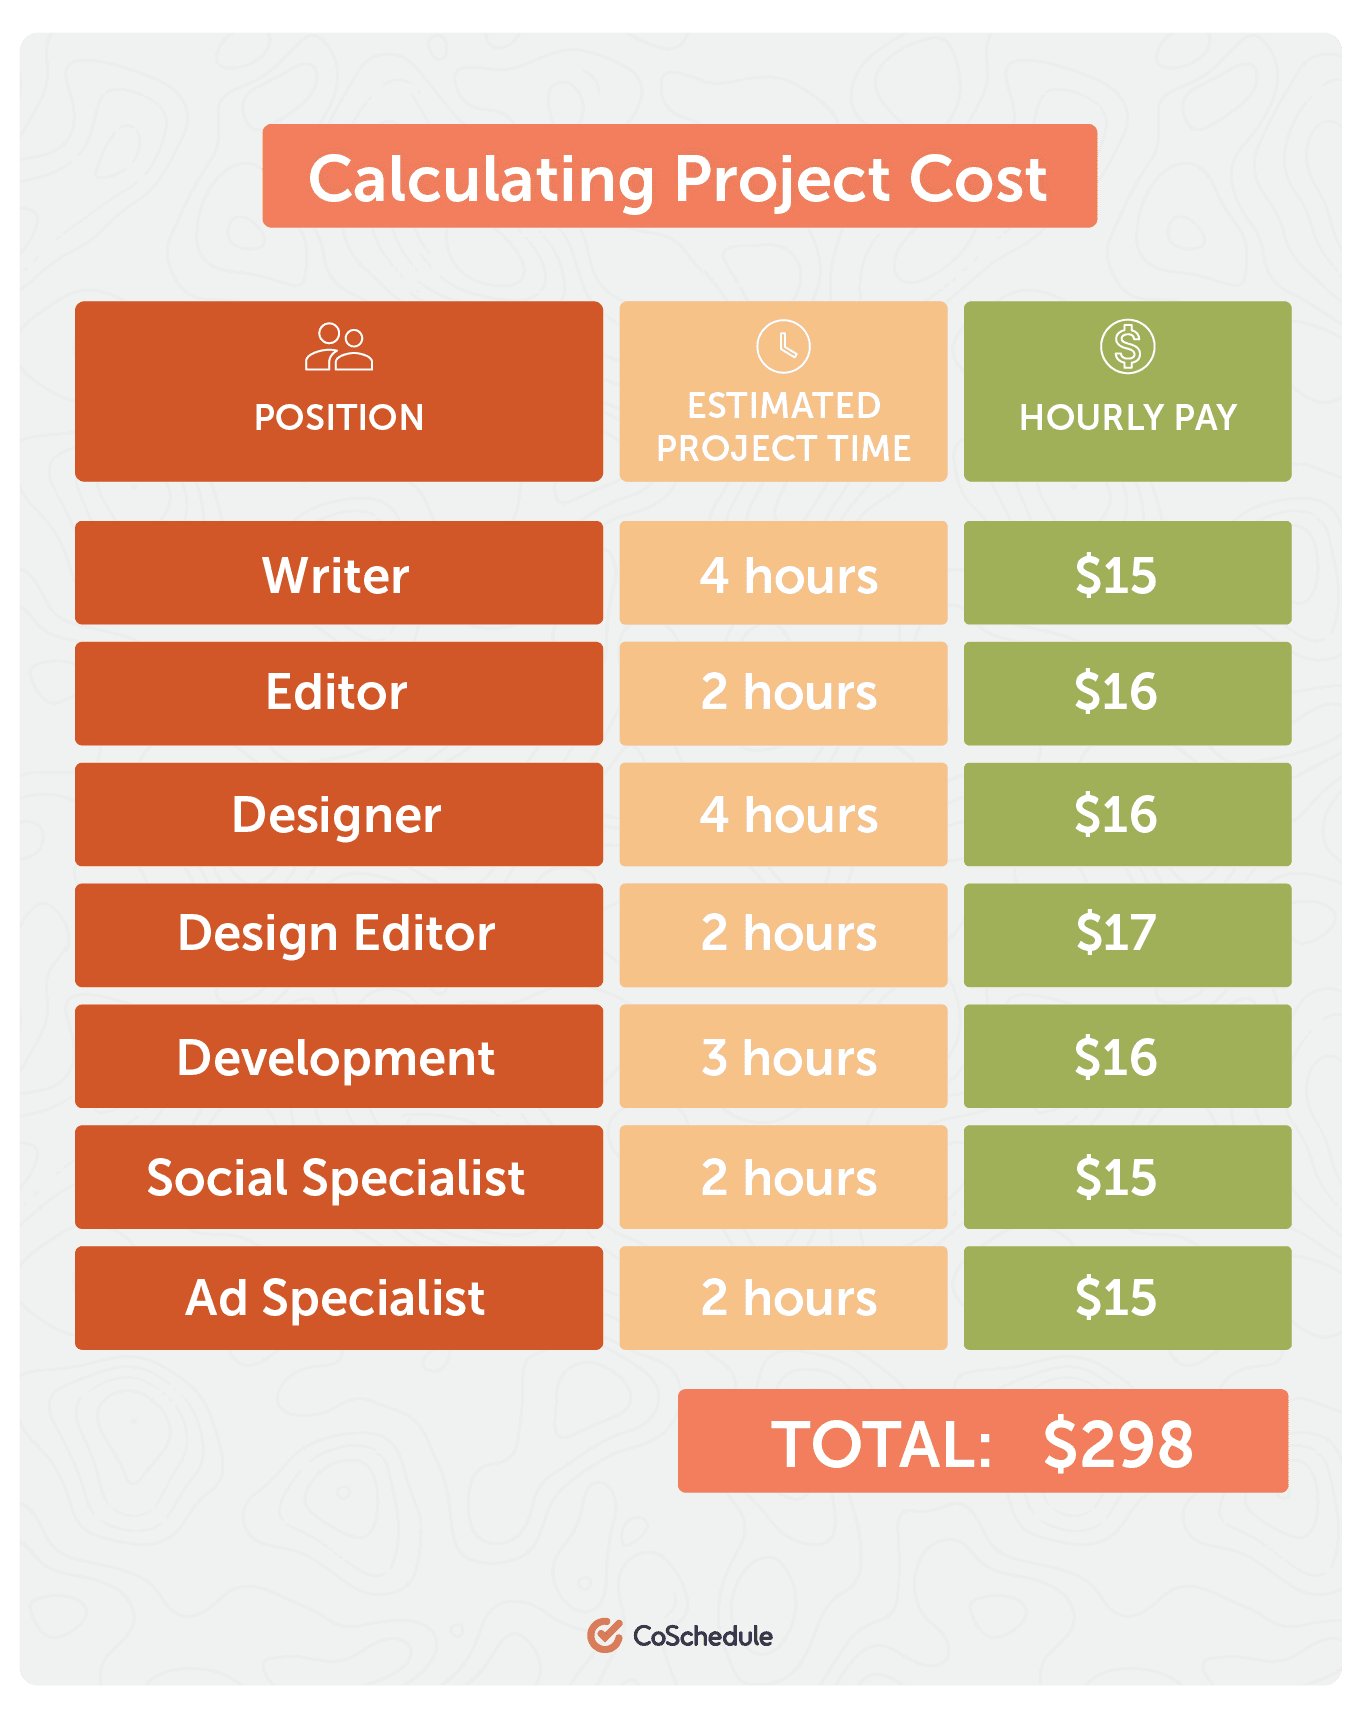 How to calculate project cost